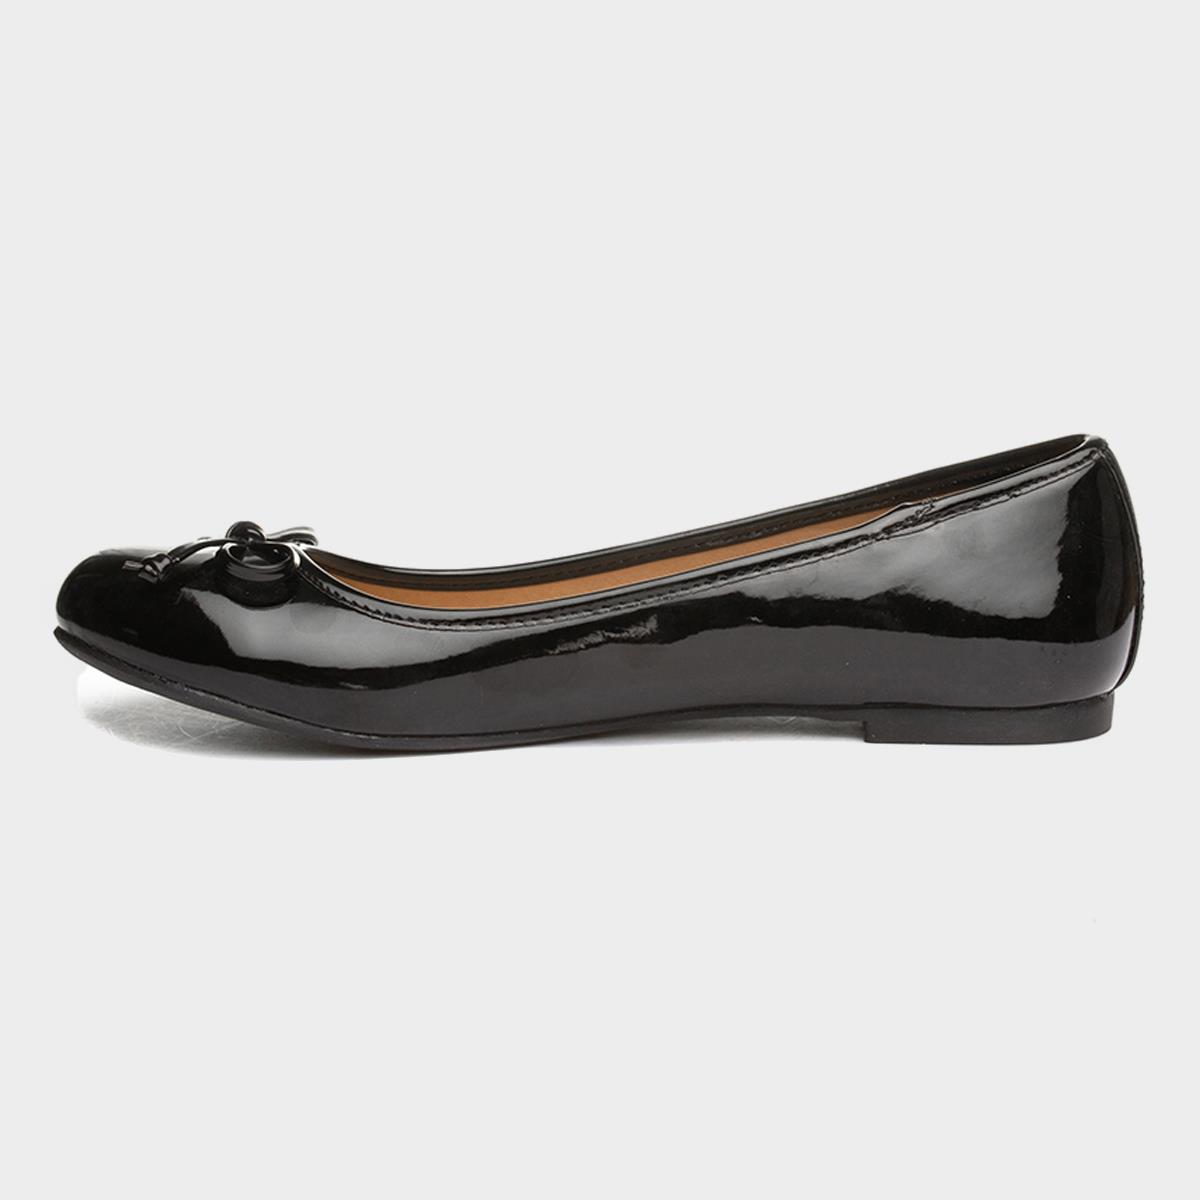 Lilley Womens Black Slip On Ballerina with Bow 